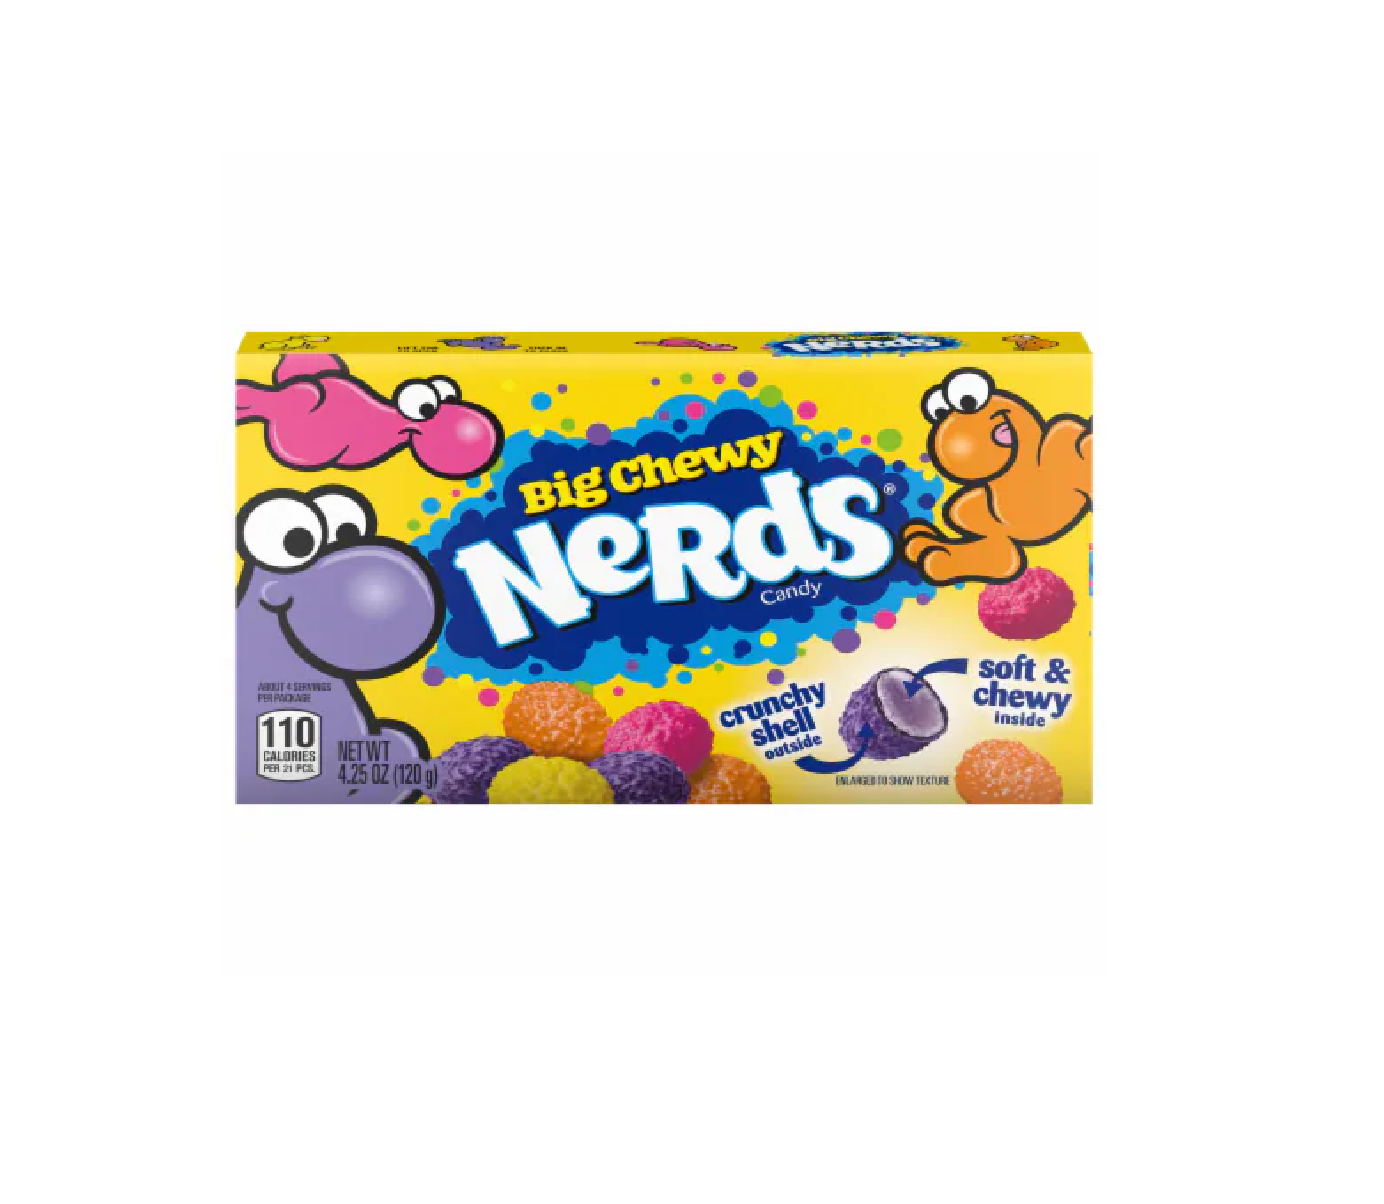 Nerds Big Chewy 120g – Box of 12